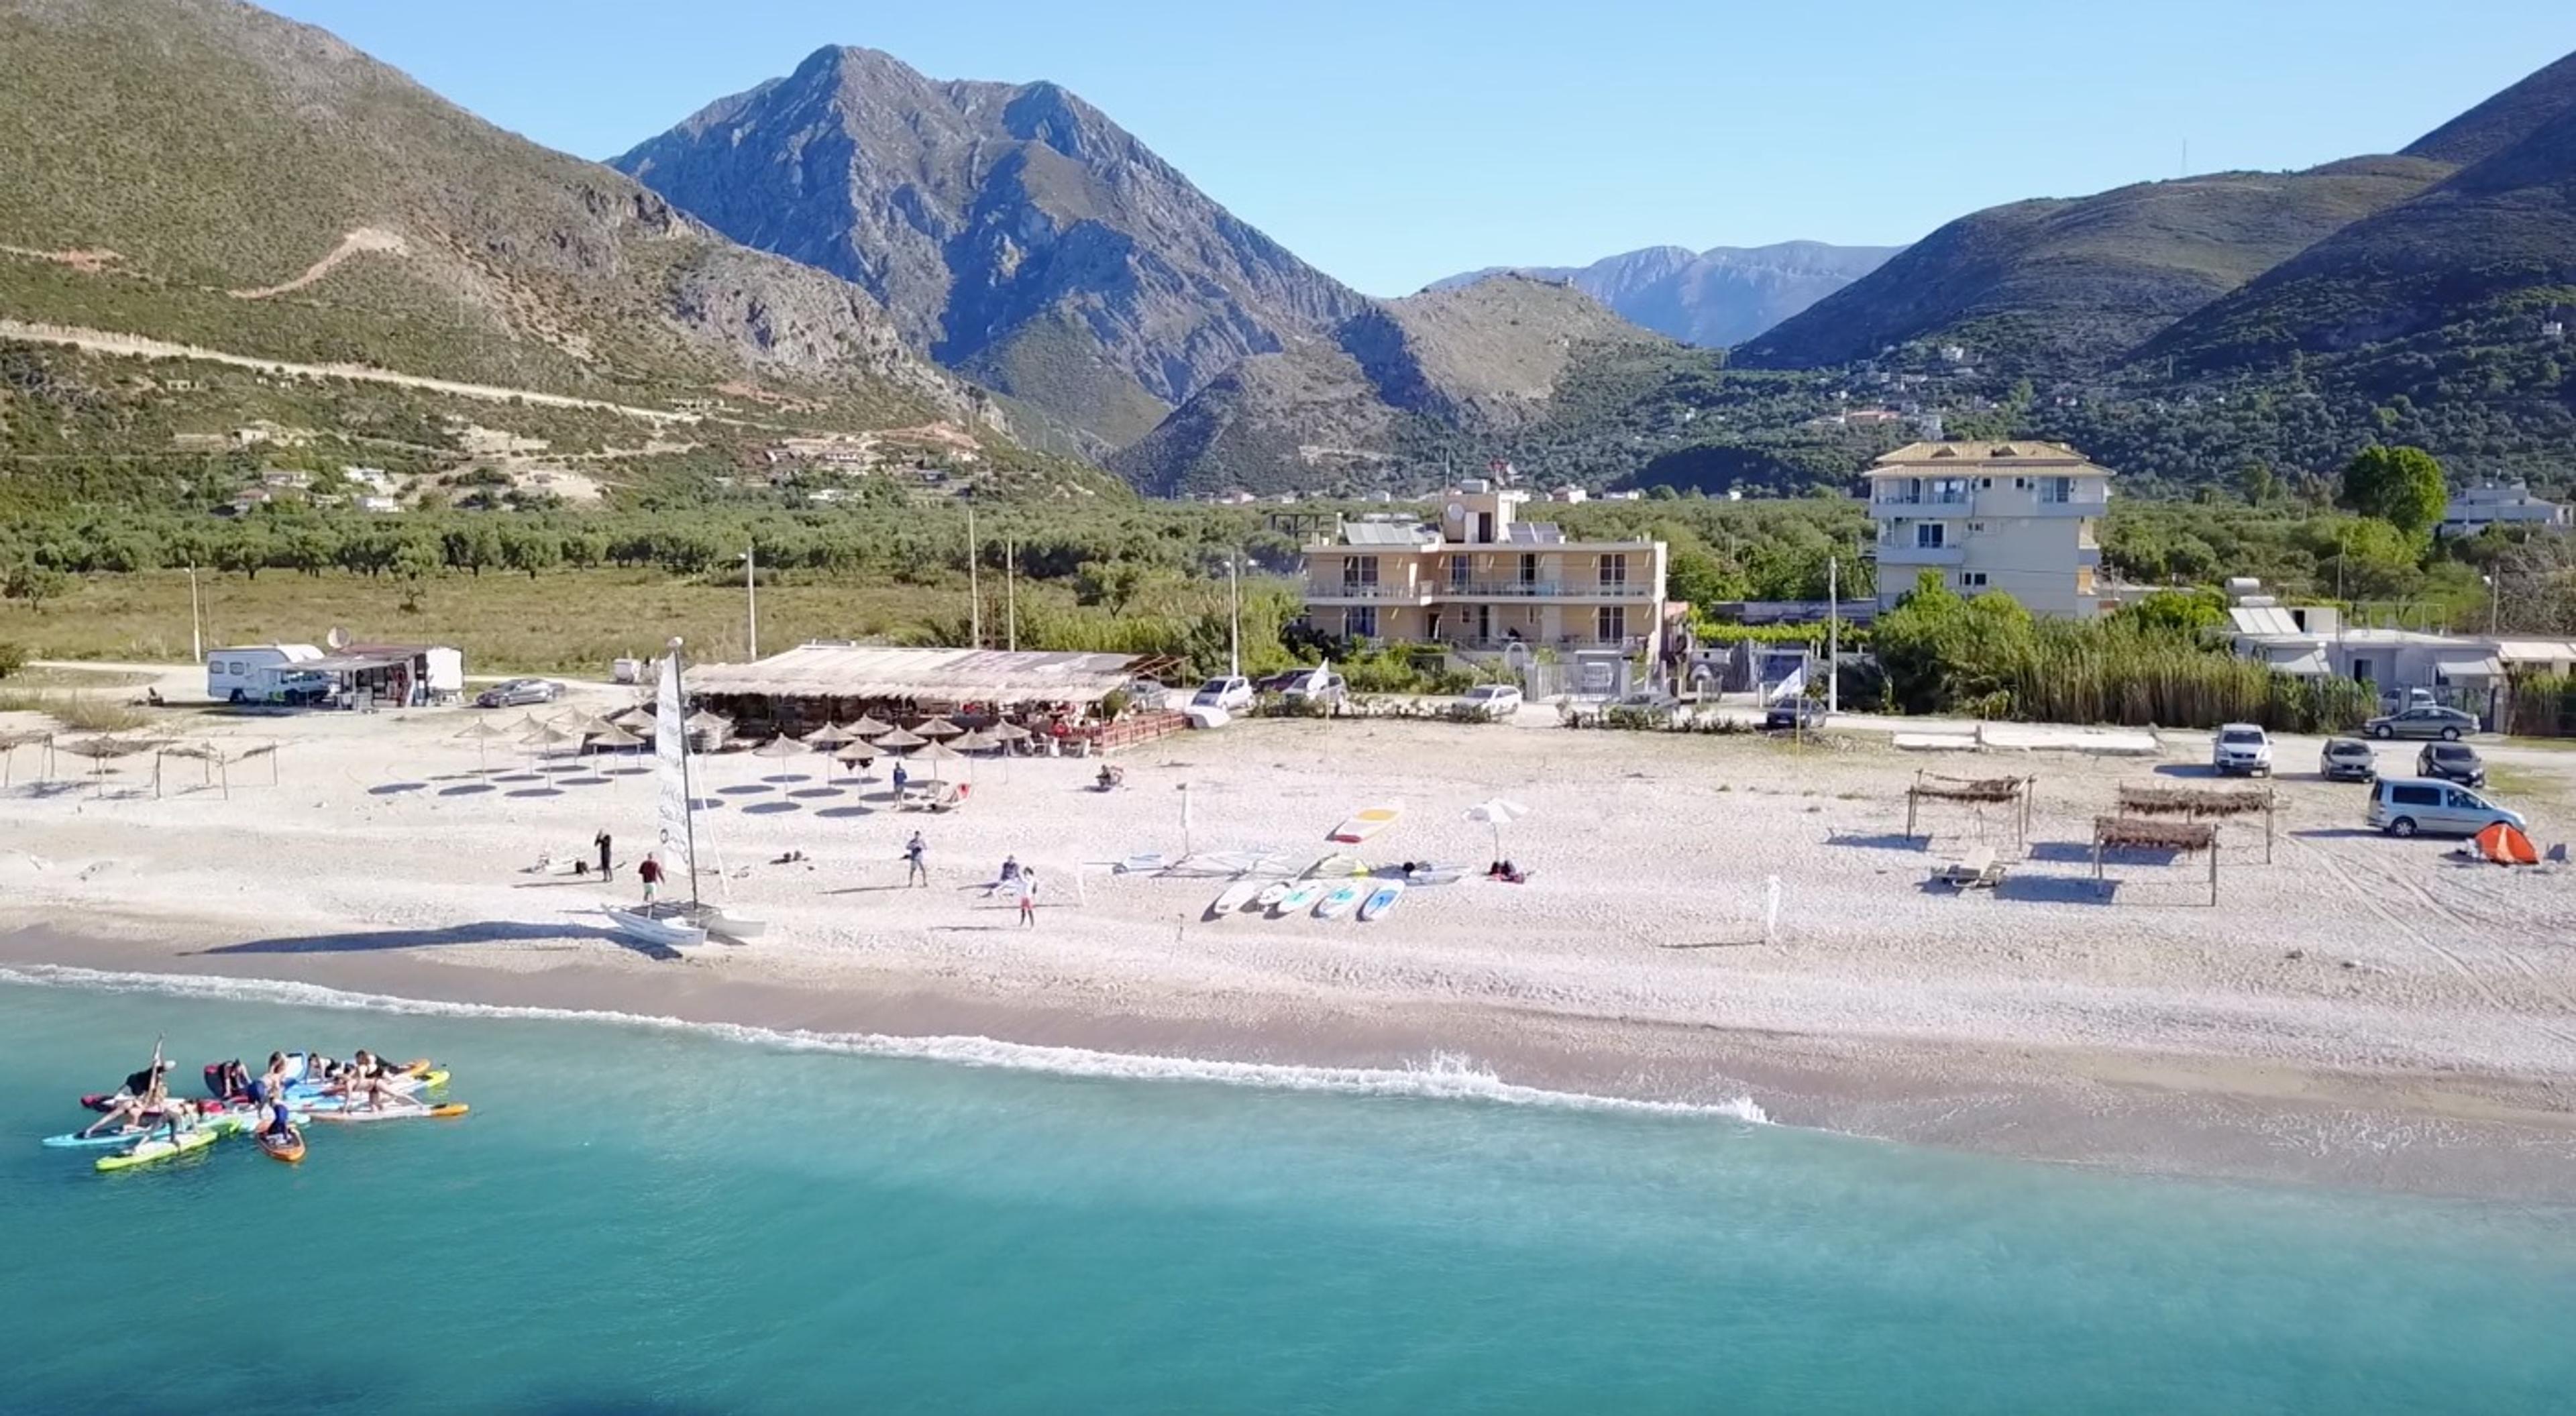 Drone image from the sea with view of the beach and the mountains of Borsh